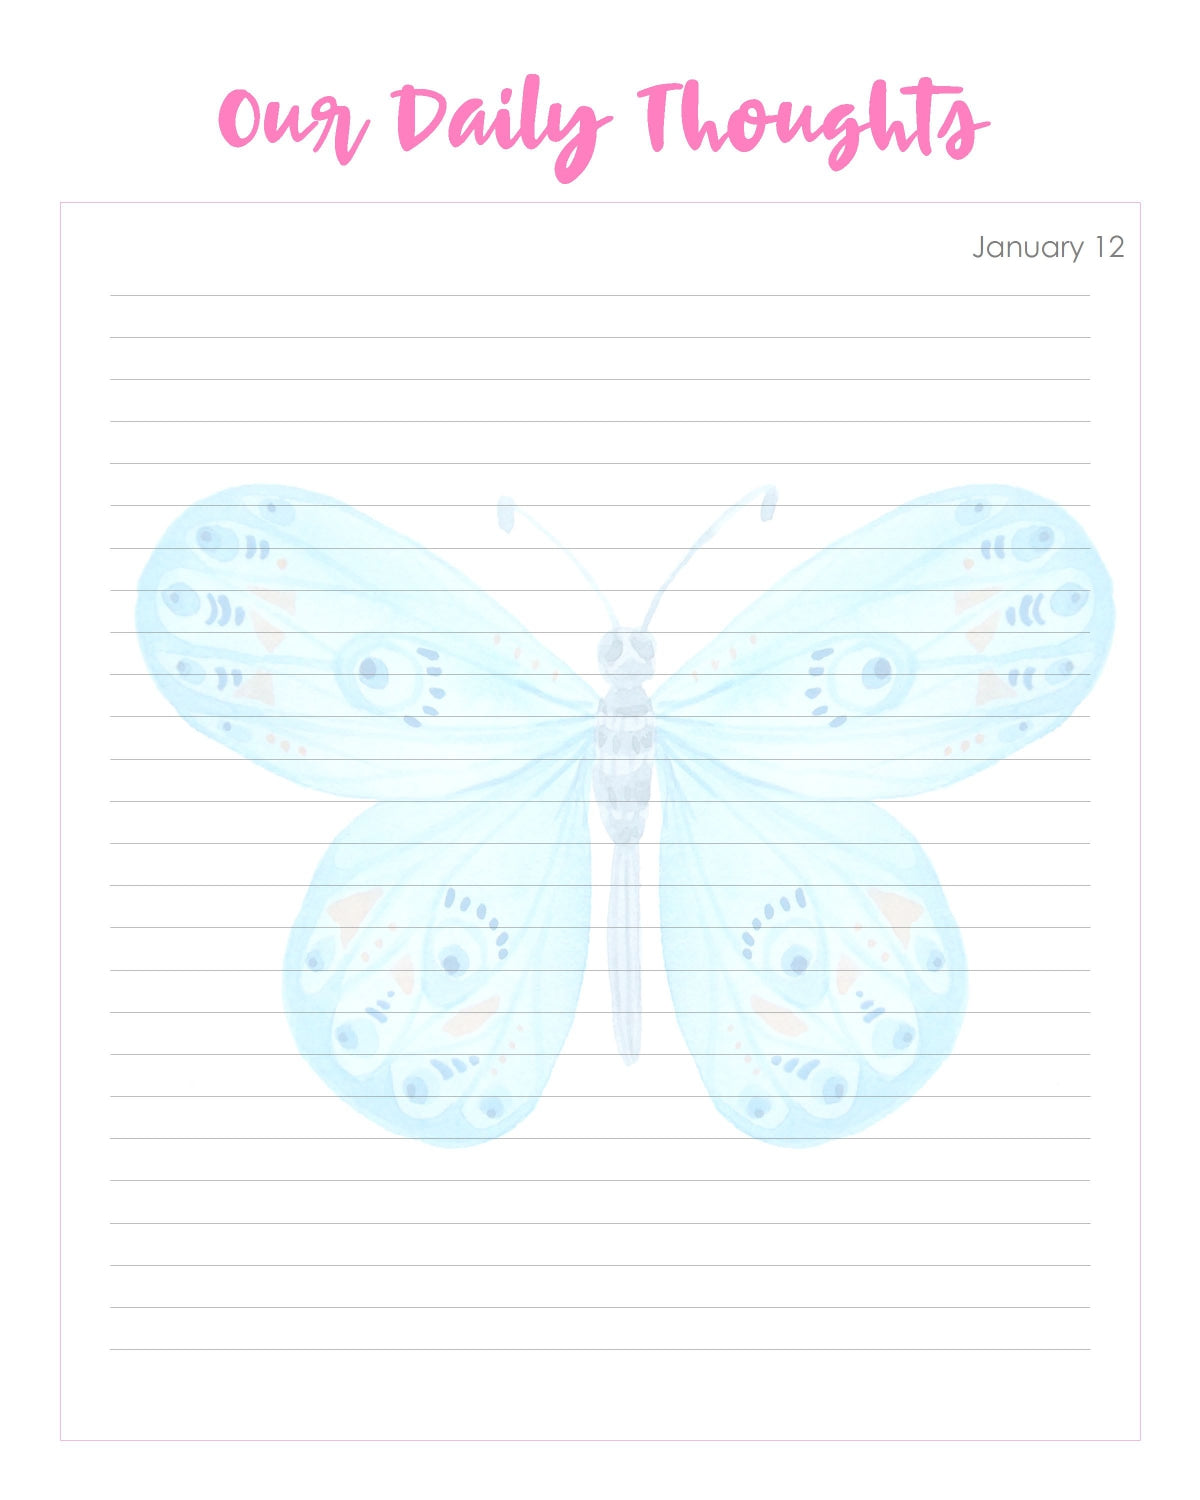 Mother and Daughter Journal (523 Pages)